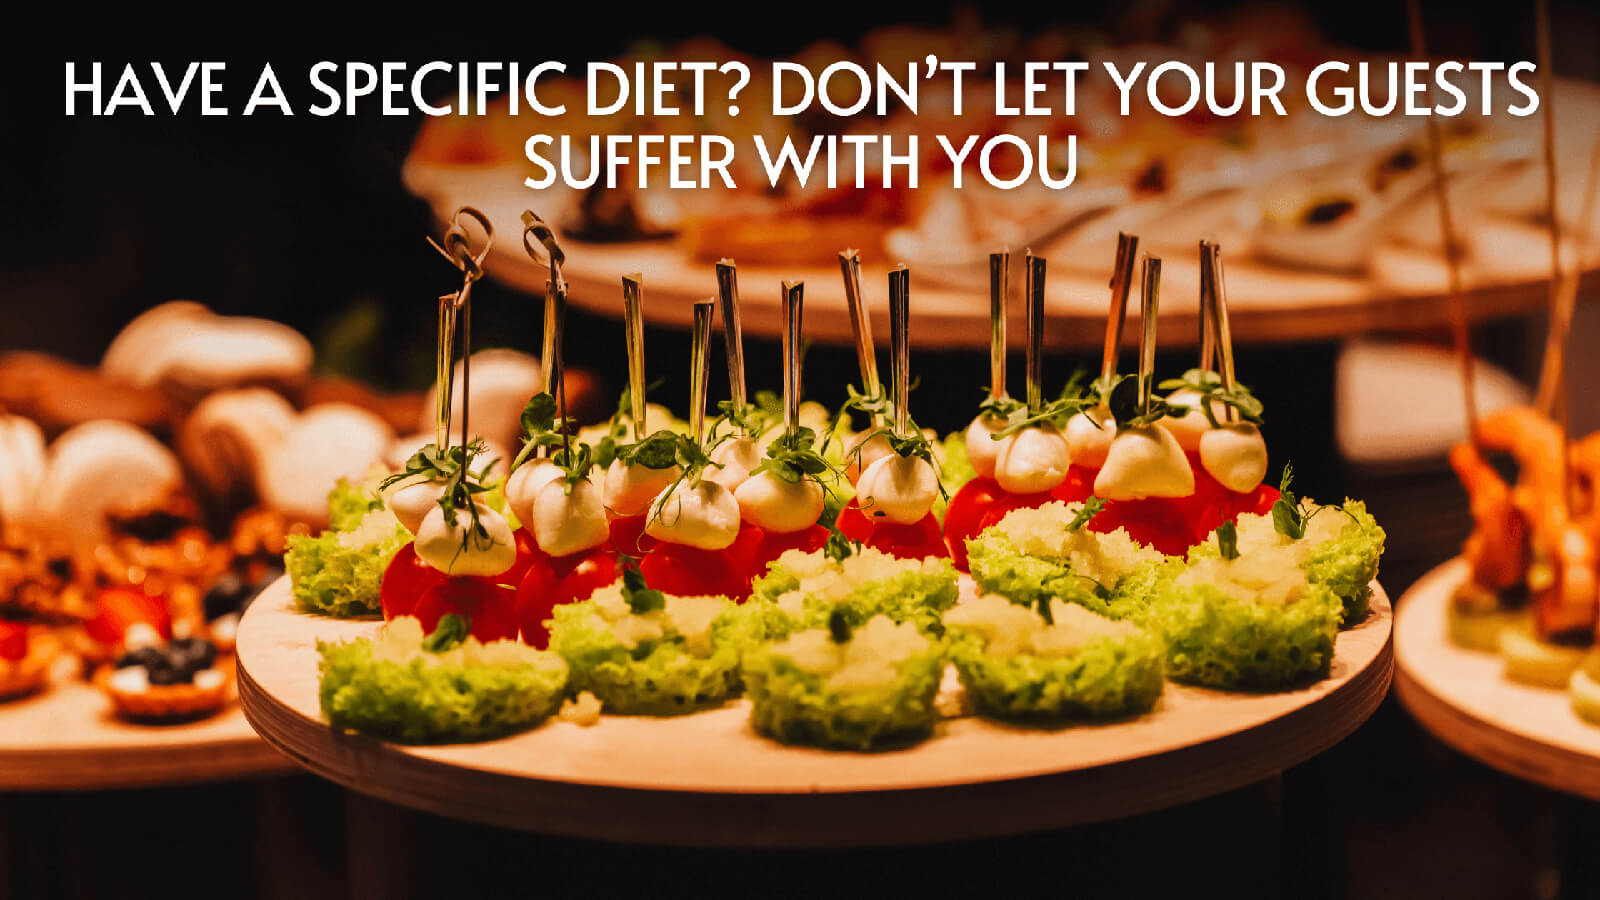 You are currently viewing Have A Specific Diet? Don’t Let Your Guests Suffer With You in 2023